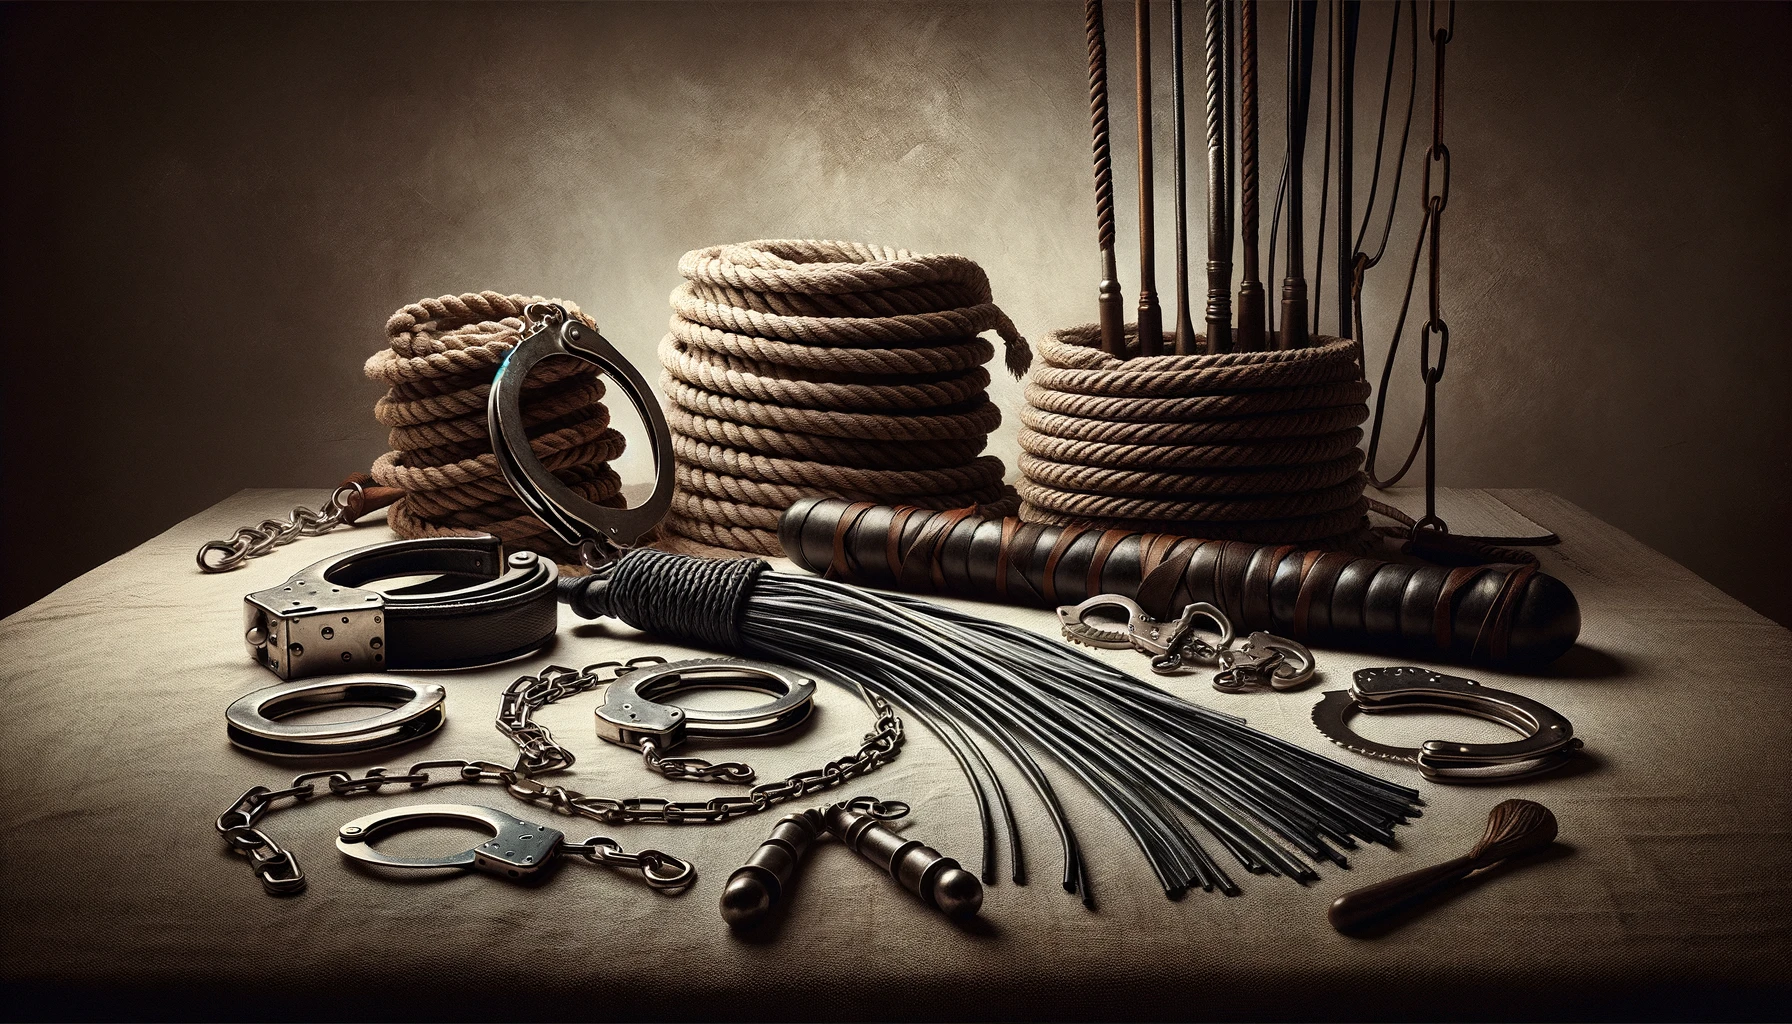 Various bondage tools including restraints, ropes, and sensory items